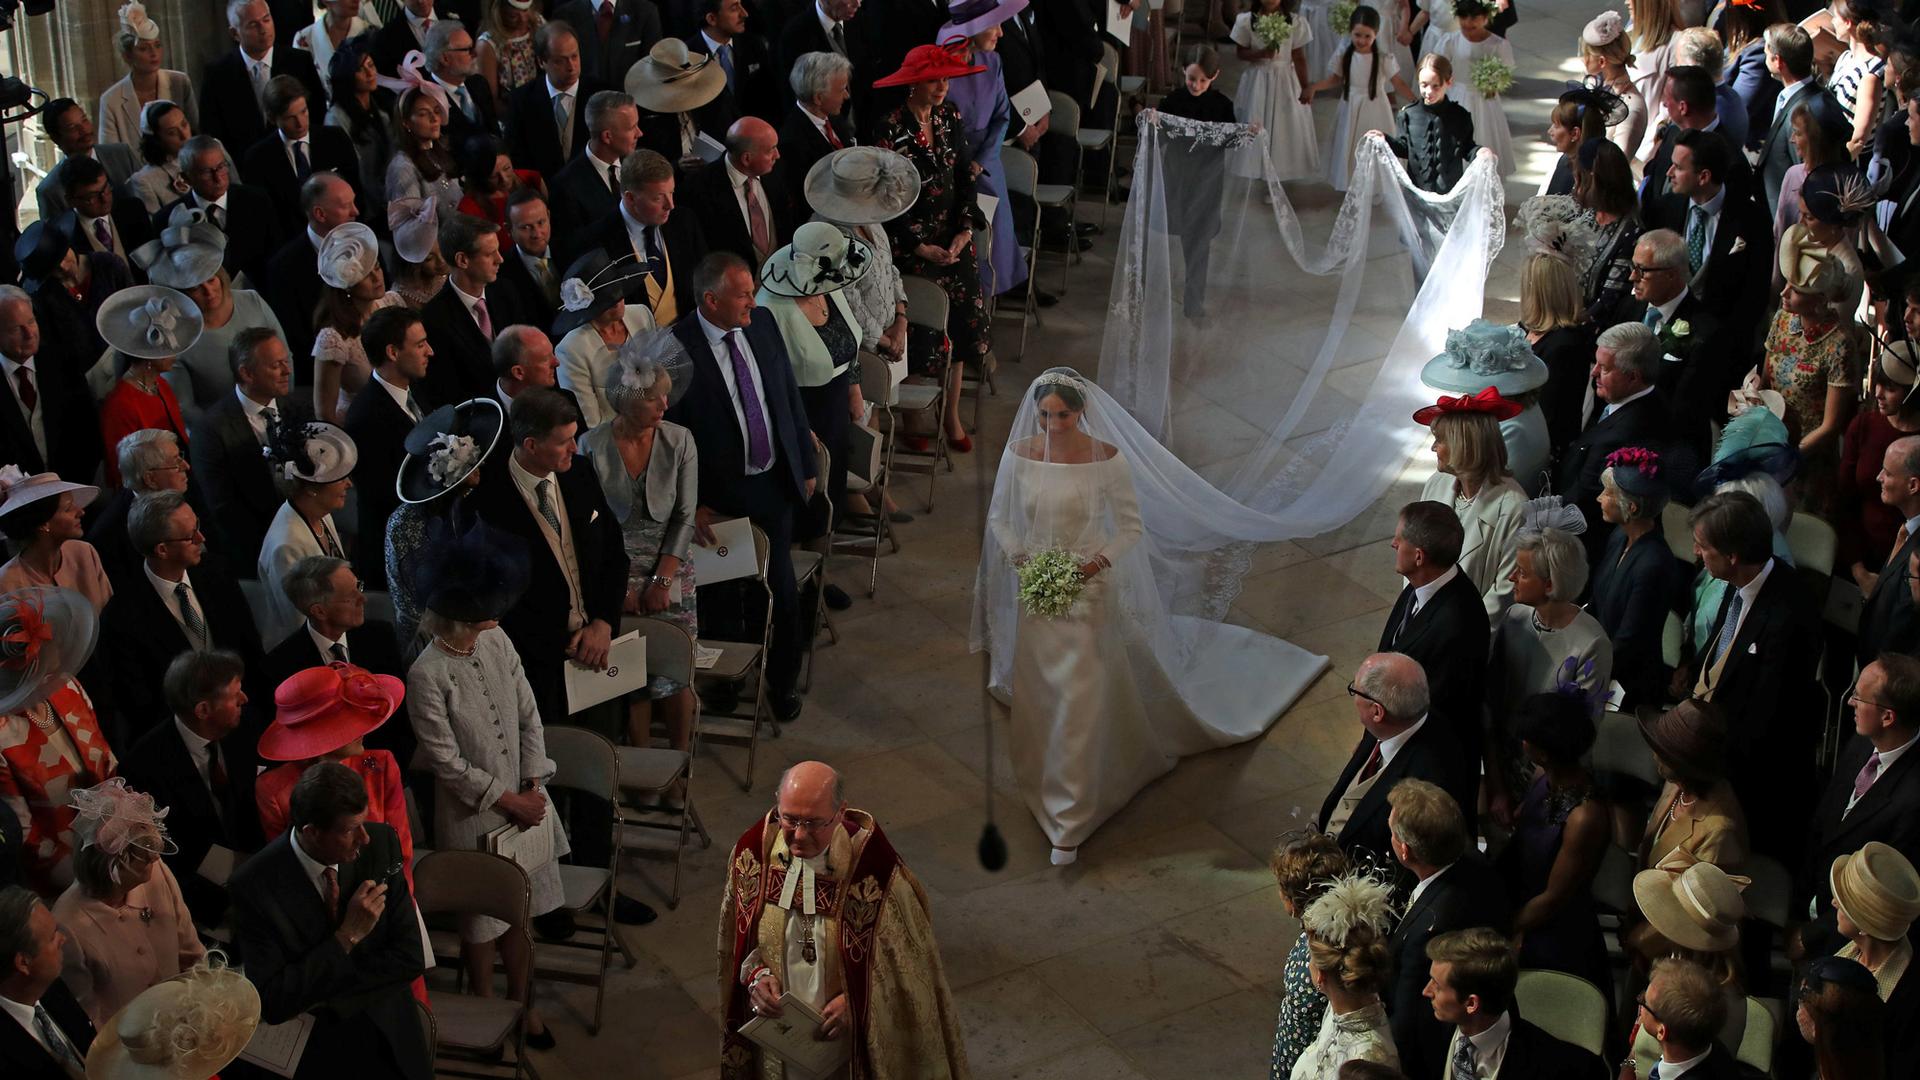 A bride, Meghan Markle, walks down the center of the aisle of a church. Her long white train drags beside her. Around her, everyone is standing. 